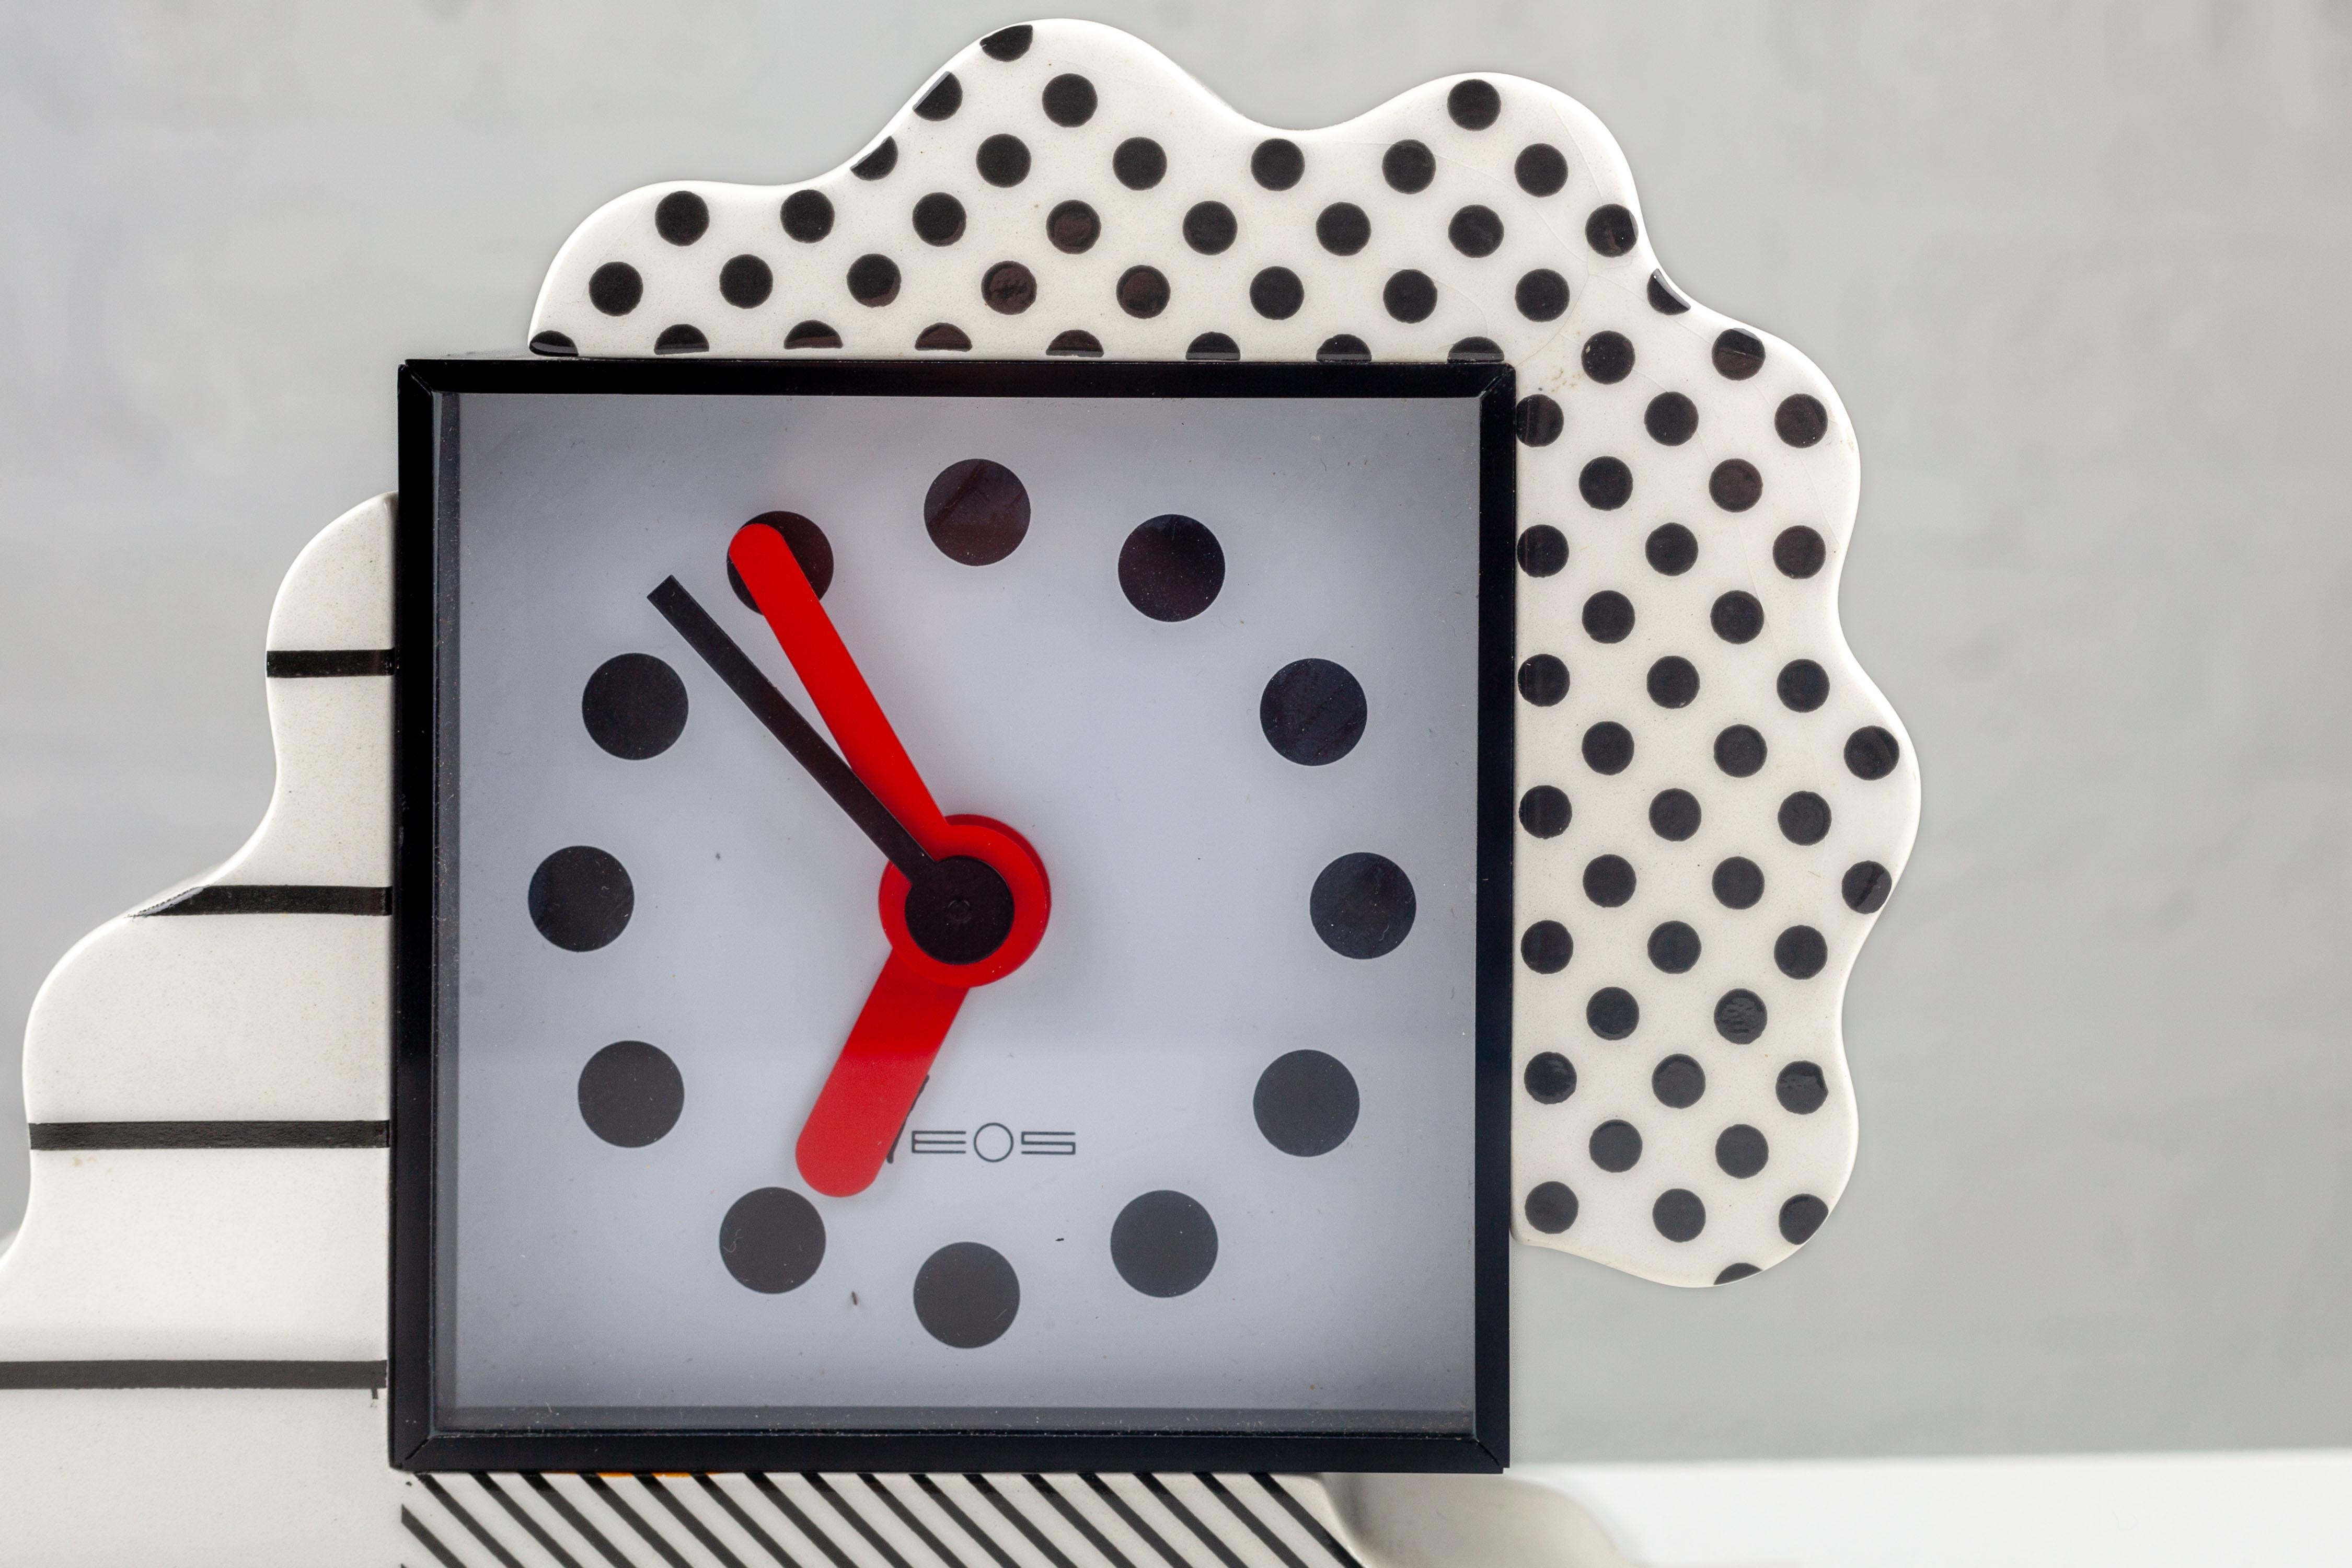 Post-Modern Memphis Clock by Nathalie du Pasquier and George Sowden for Neos Lorenz Italy